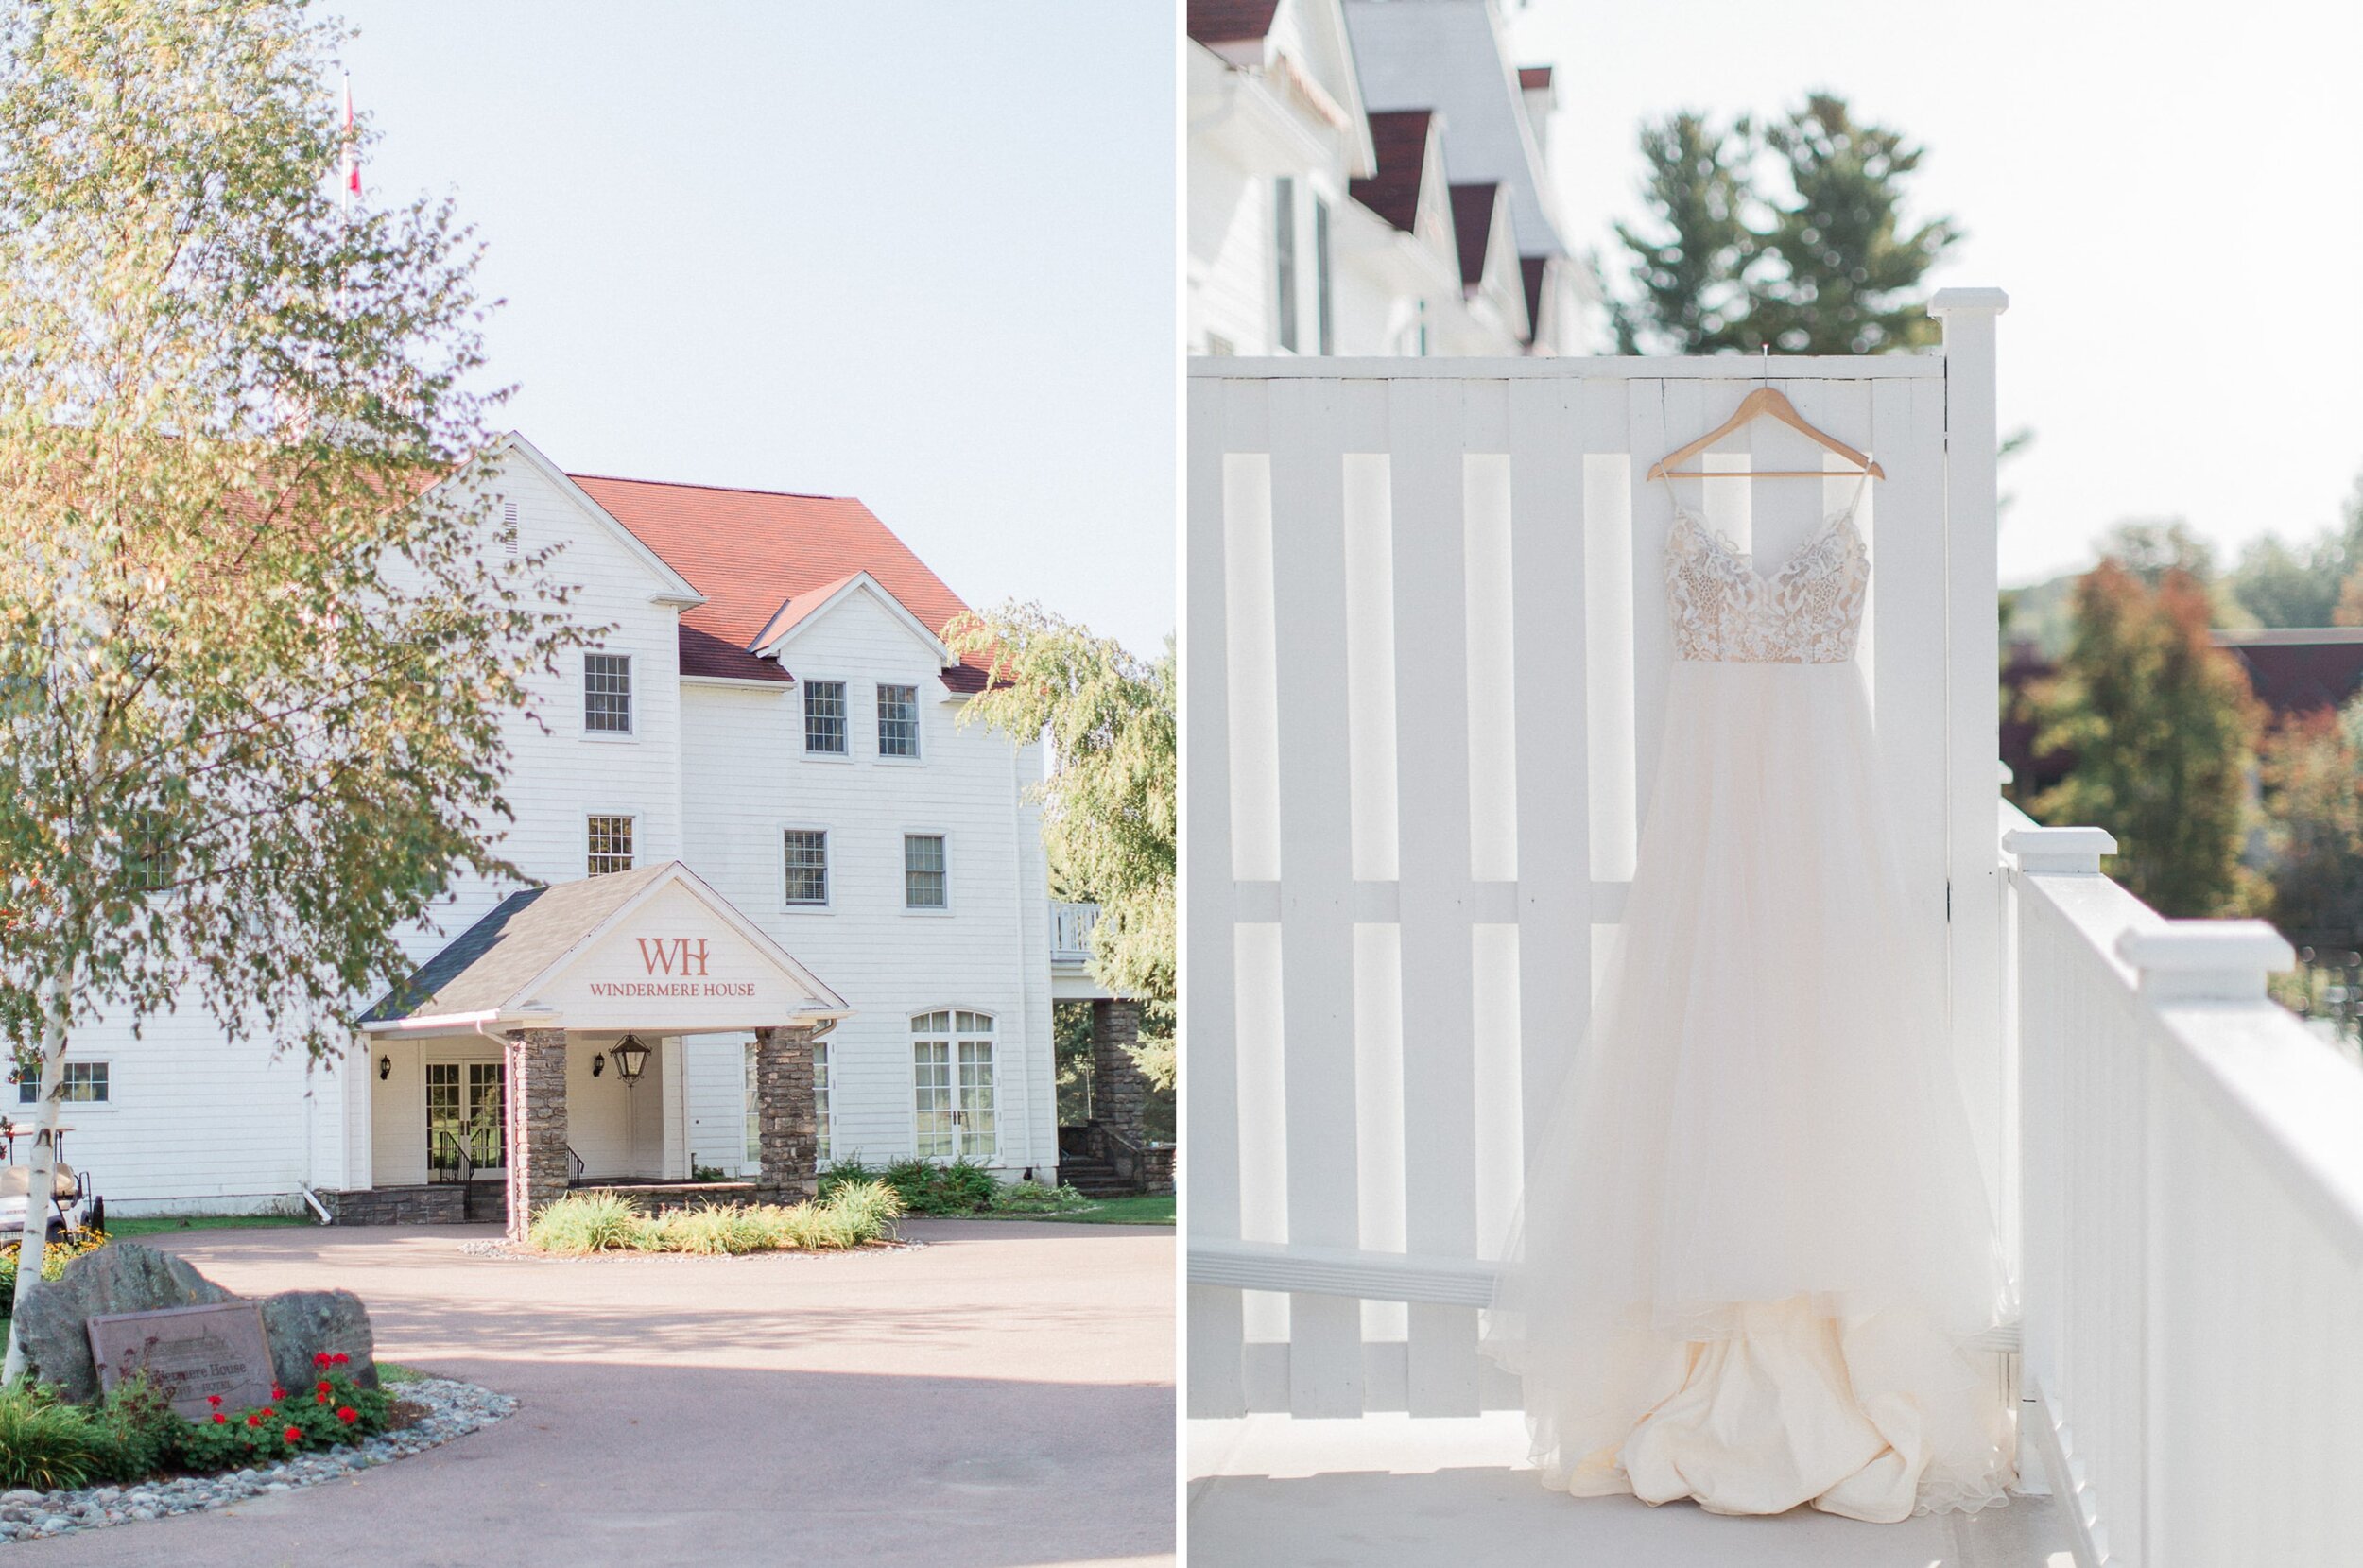 Lakeside wedding at windermere house in muskoka on a sunny summer day